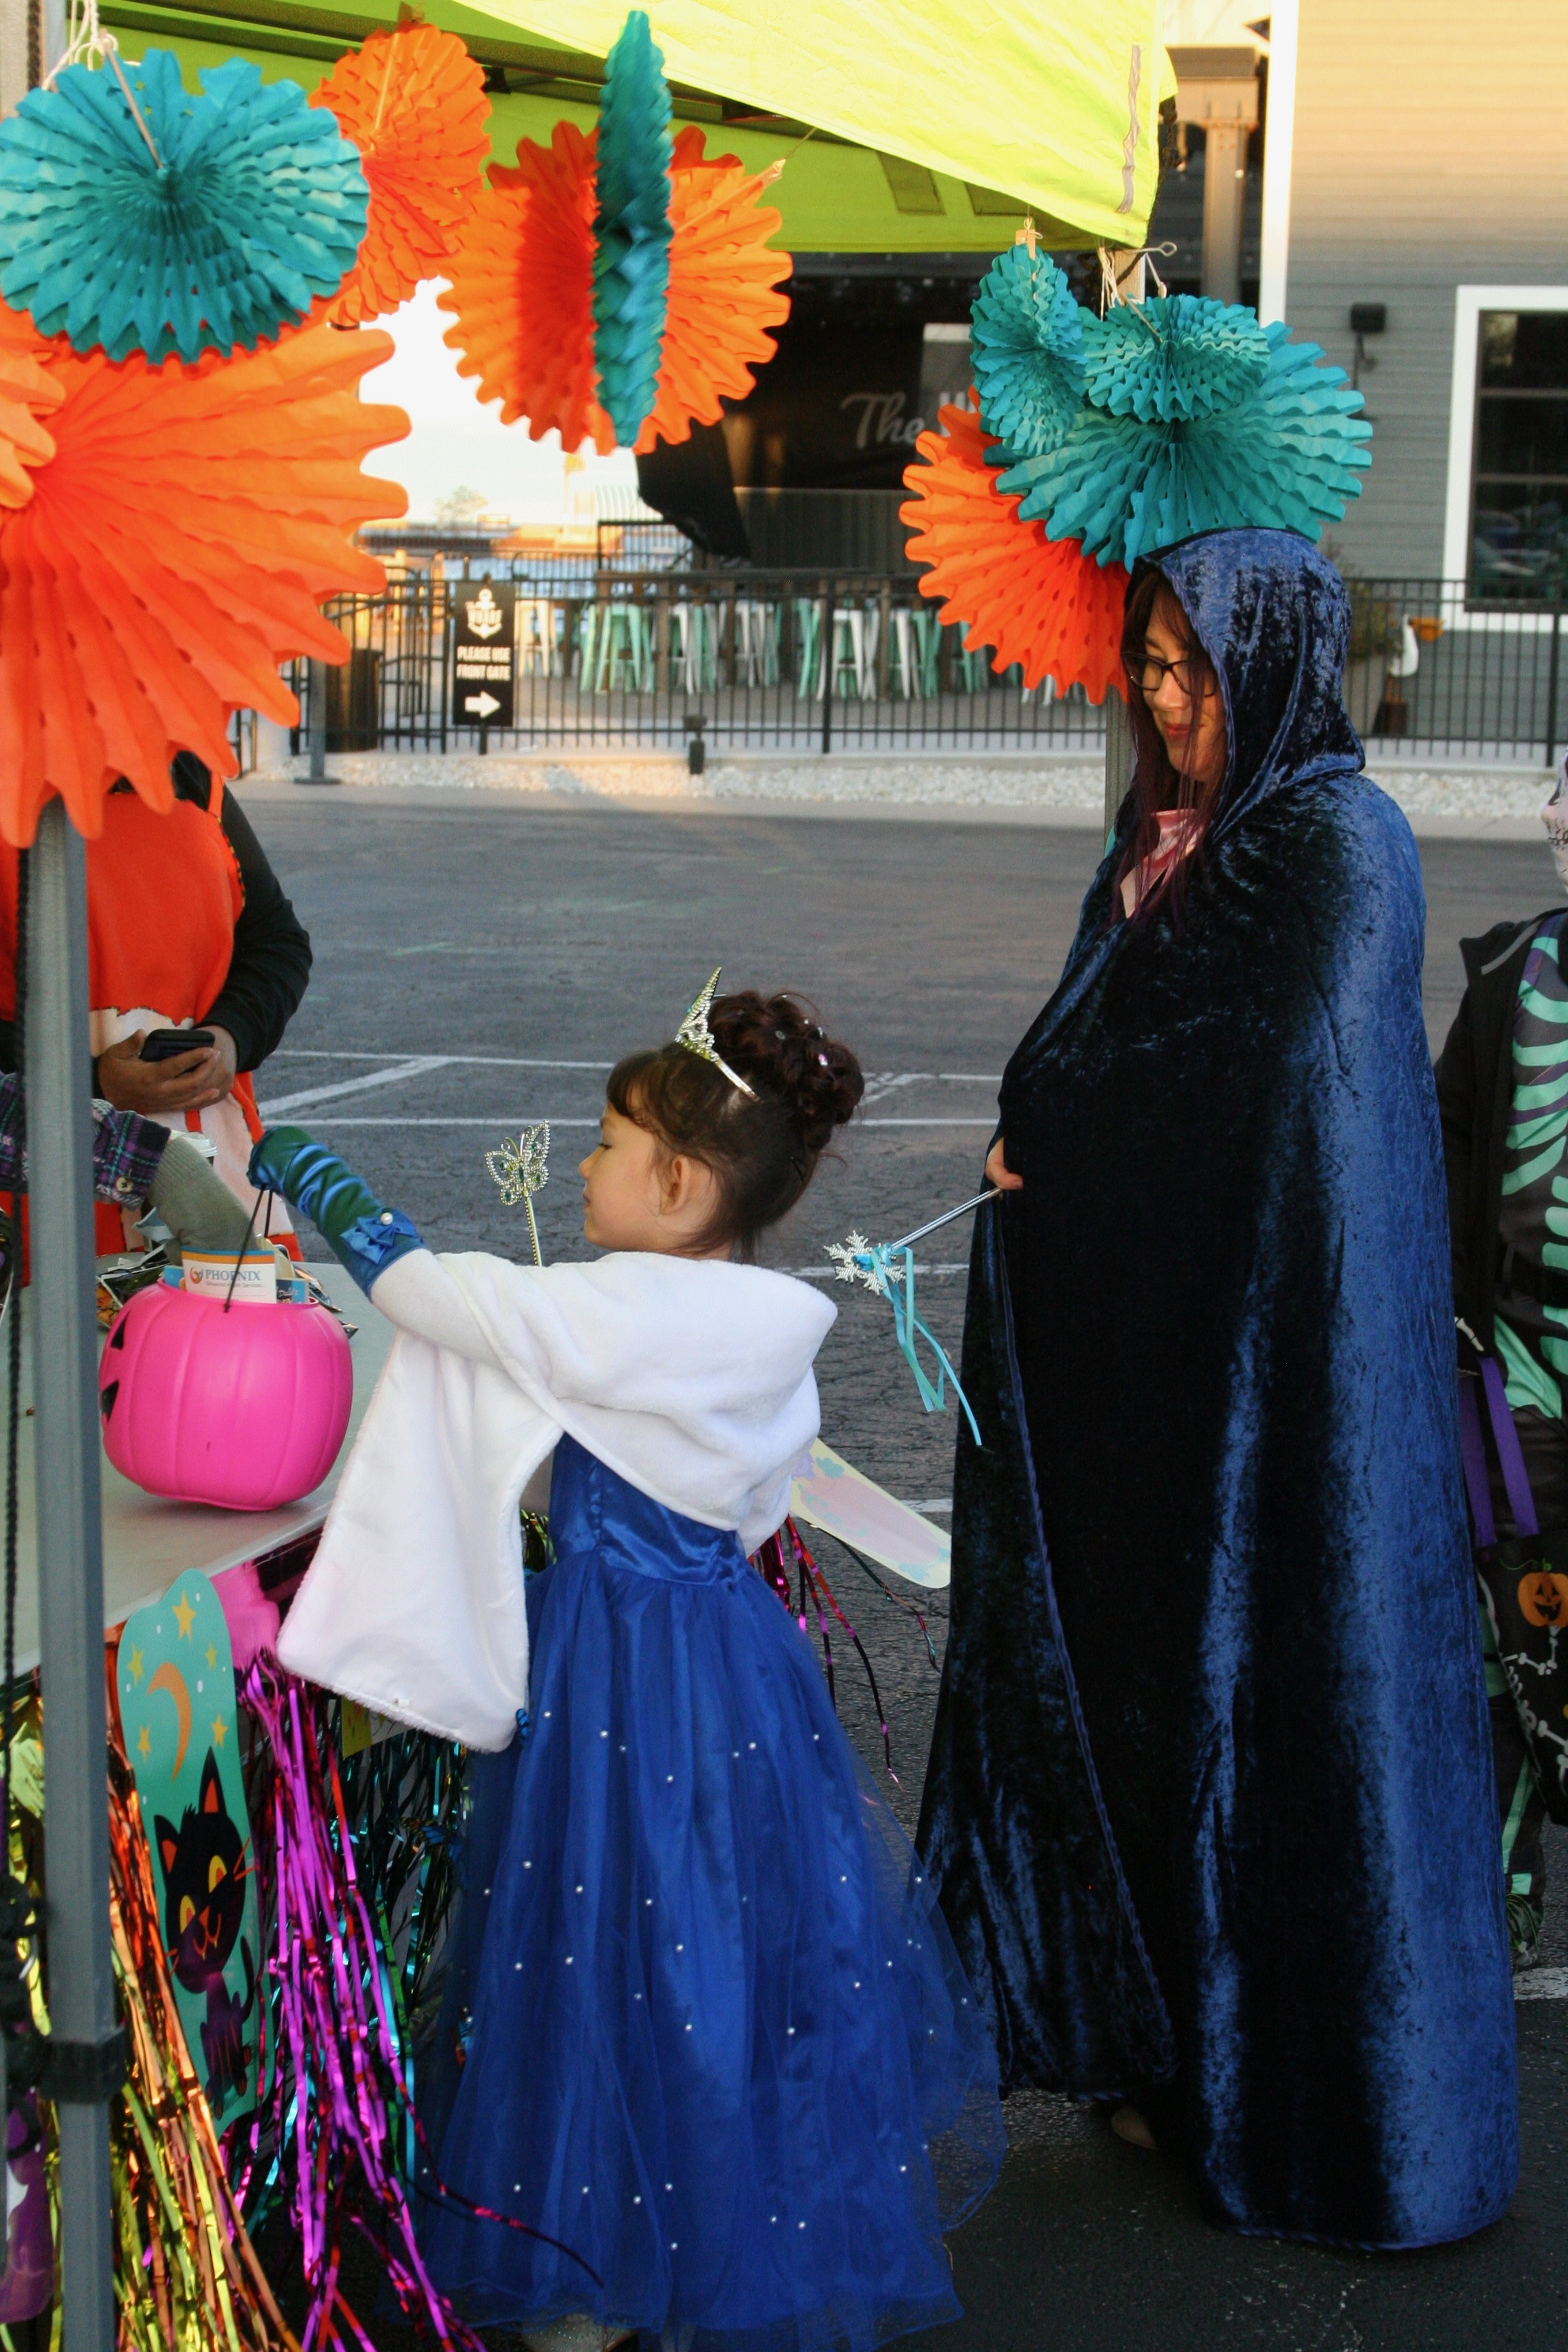 Woman wearing cloak and child dressed as princess collecting candy